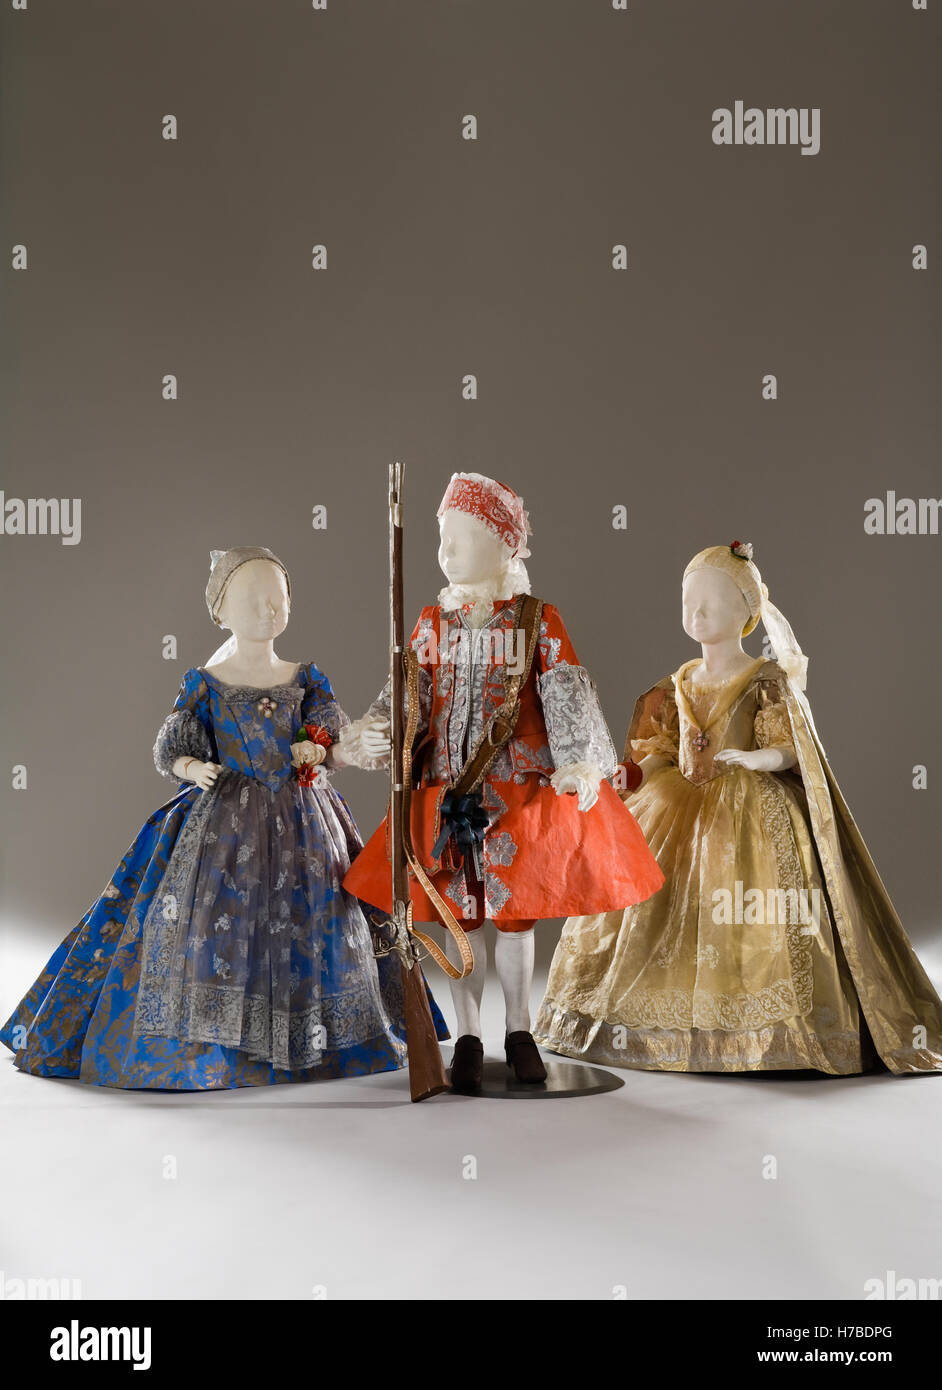 Three child mannequins in paper dress costumes historical replica paper dress by Isabelle de Borchgrave Stock Photo